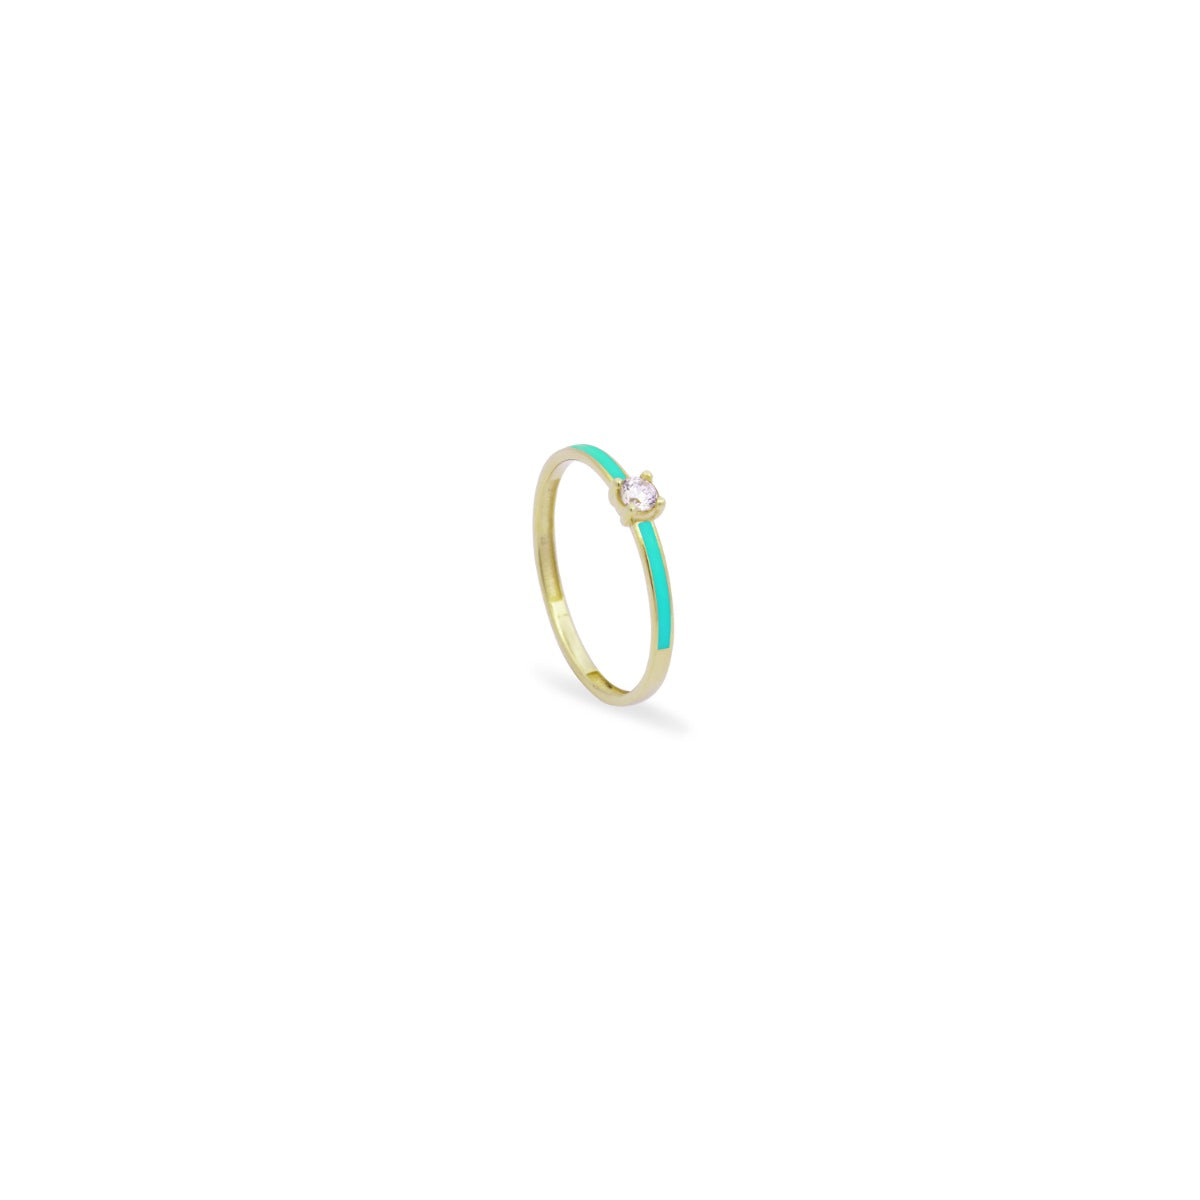 Rings - Enamel and lab-grown diamond ring - ORO18KT - 3 | Rue des Mille